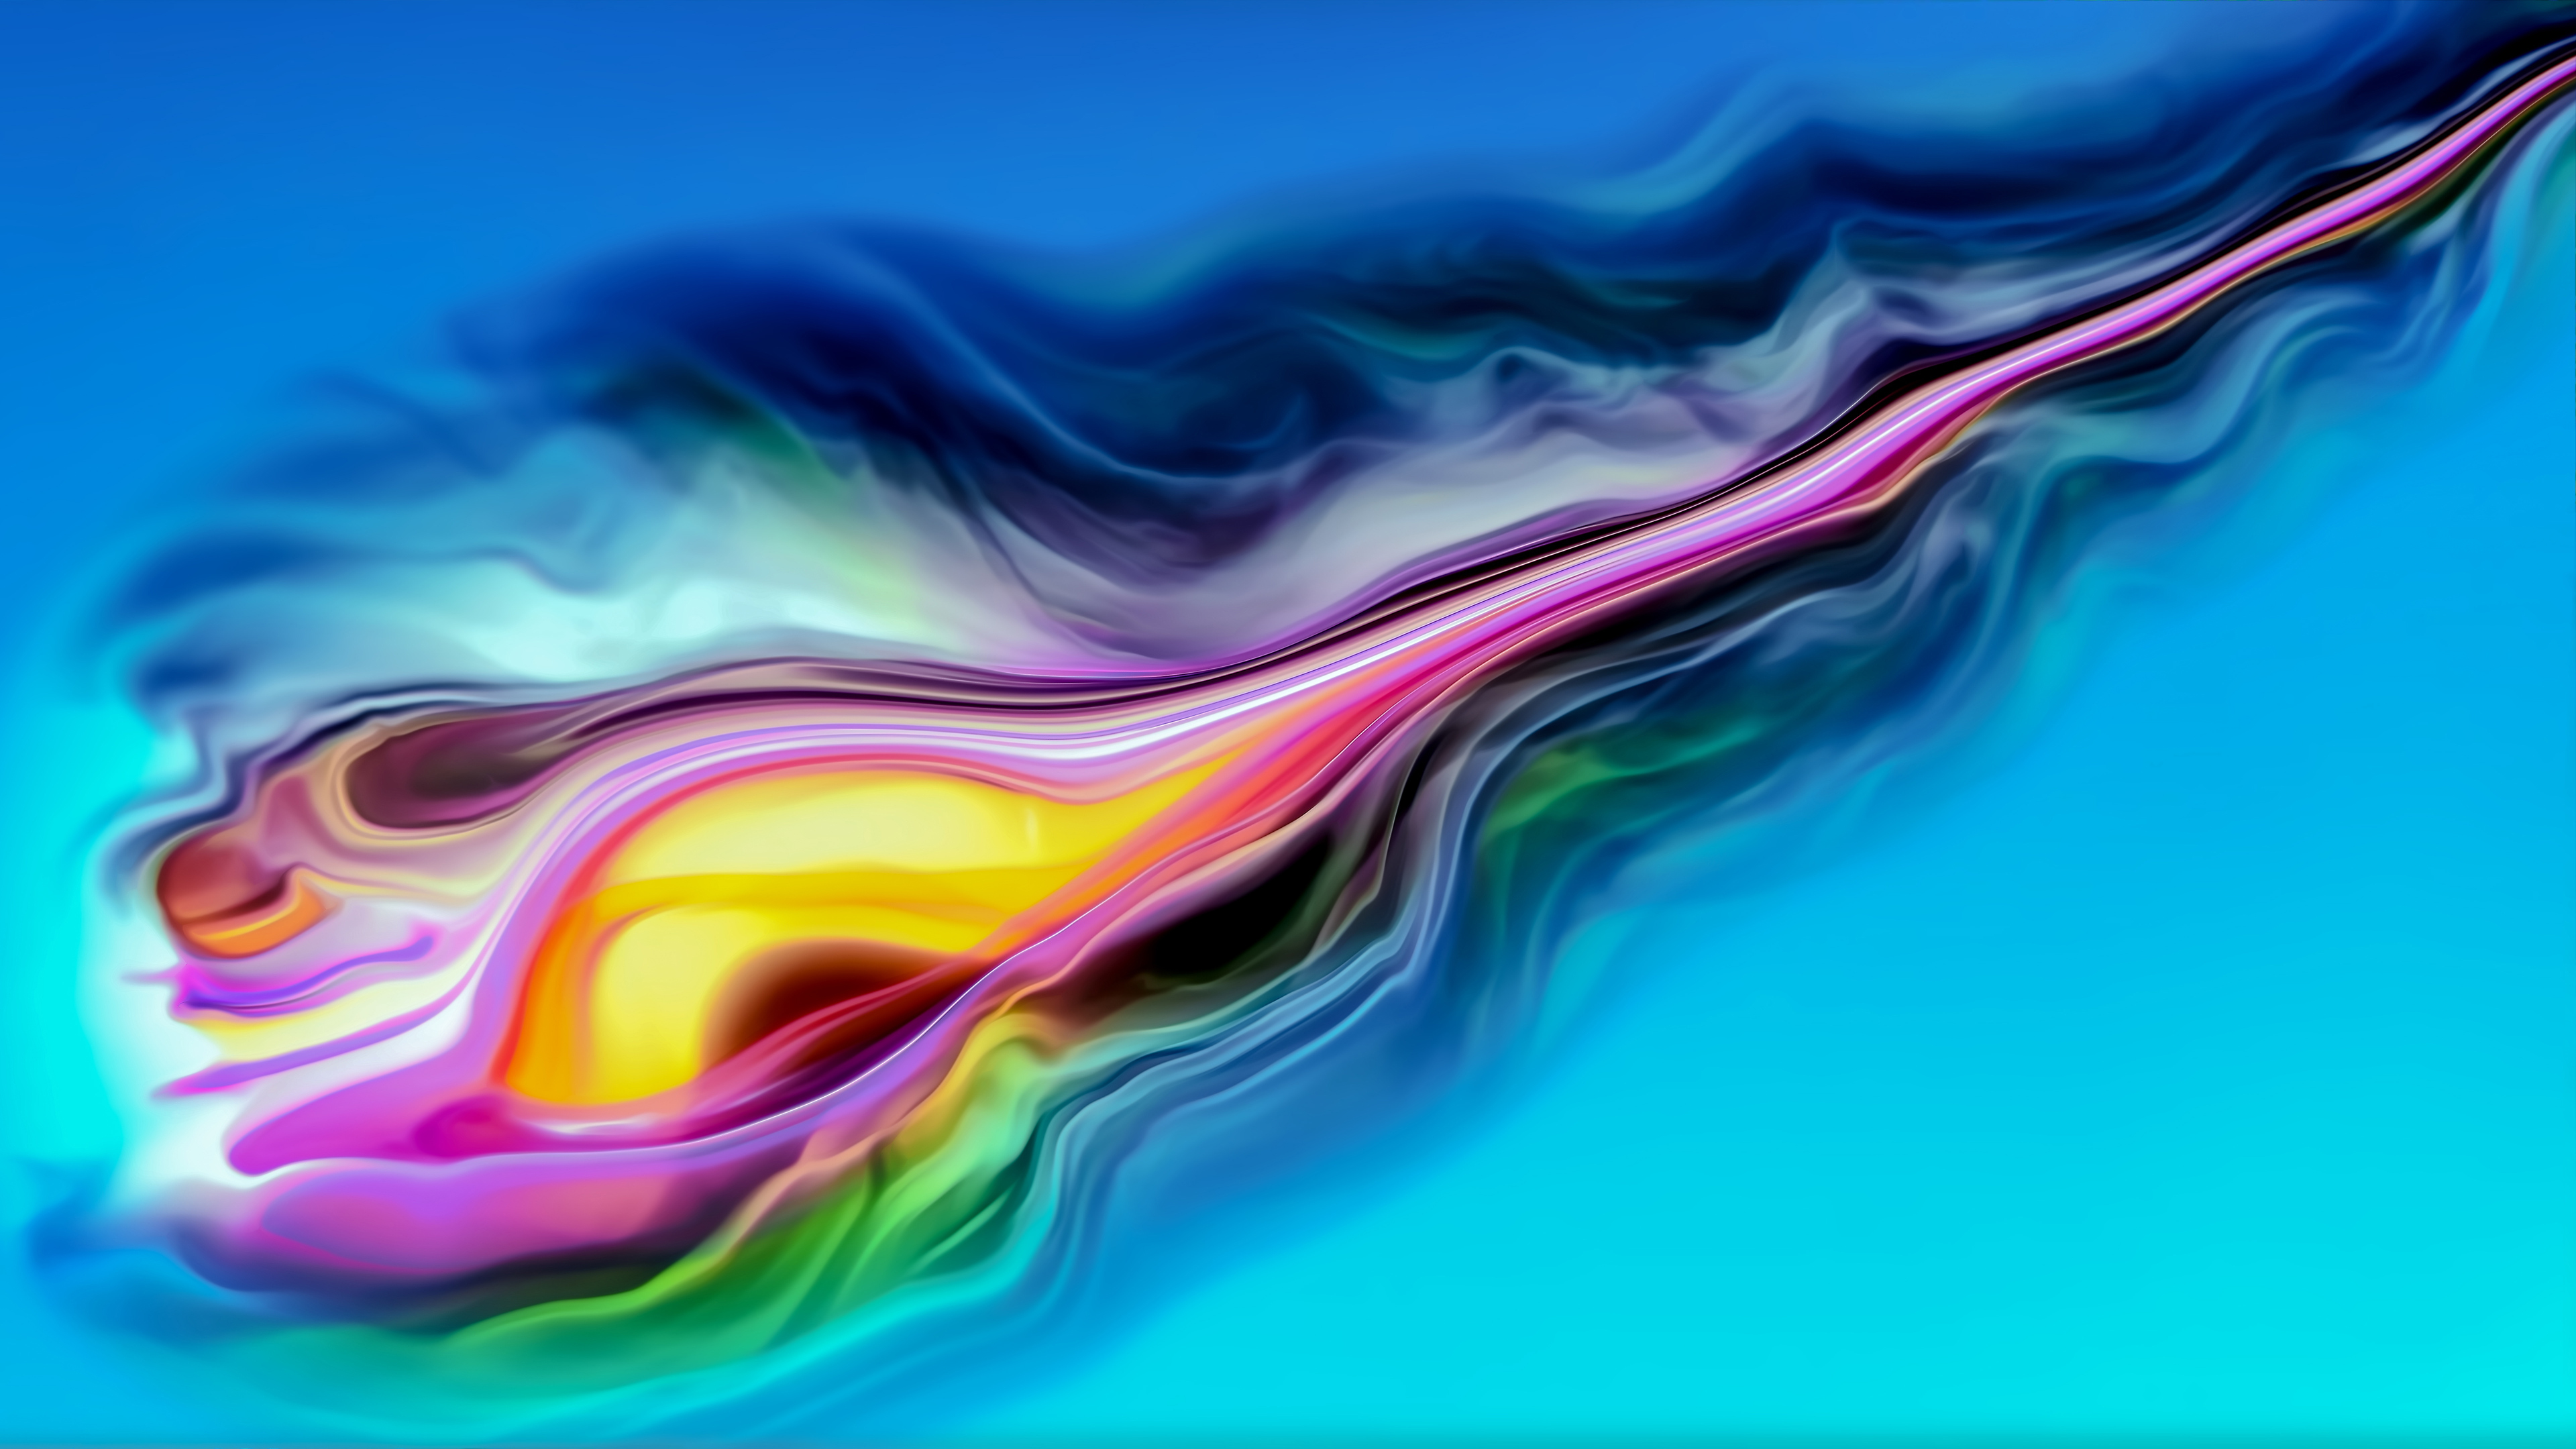 Blue Yellow Pink 4K Layer Forming Wallpaper, HD Abstract 4K Wallpapers